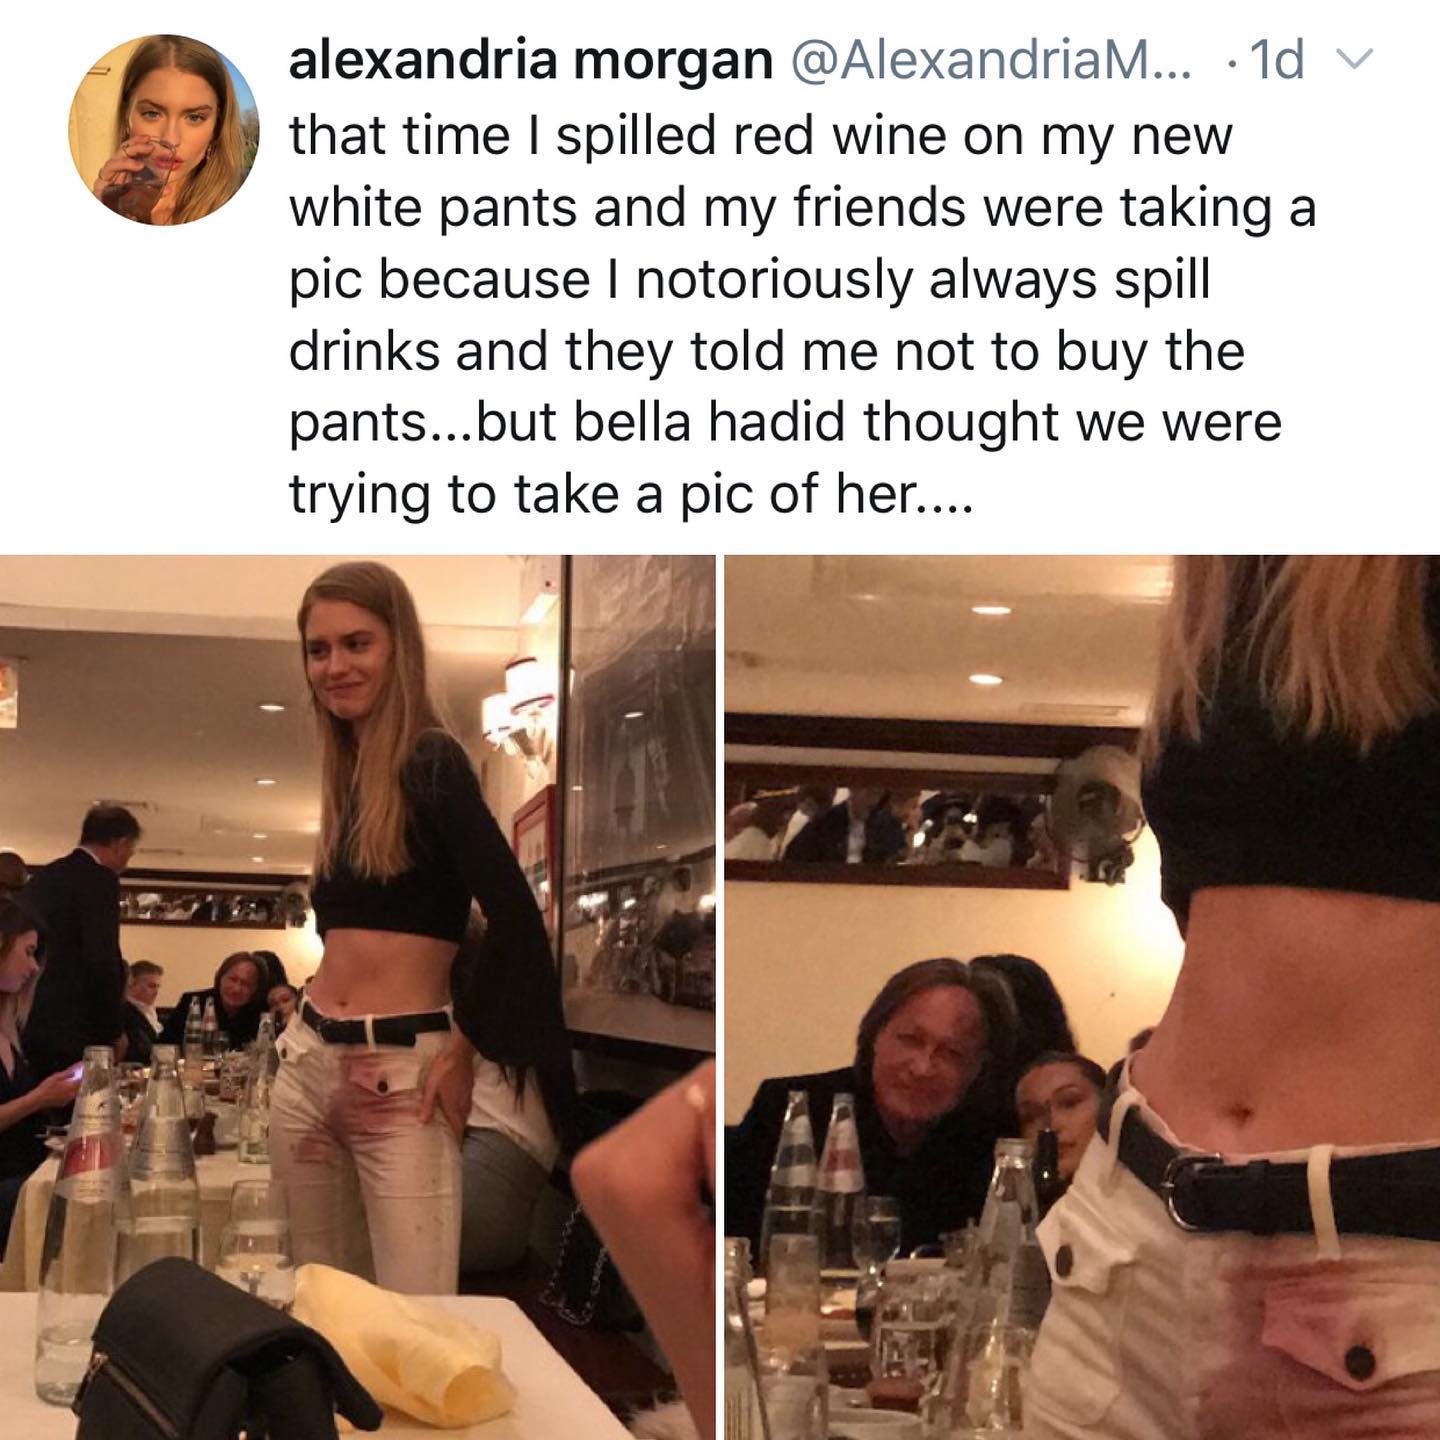 dank memes - twitter - girl - alexandria morgan ... 1d v that time I spilled red wine on my new white pants and my friends were taking a pic because I notoriously always spill drinks and they told me not to buy the pants...but bella hadid thought we were 